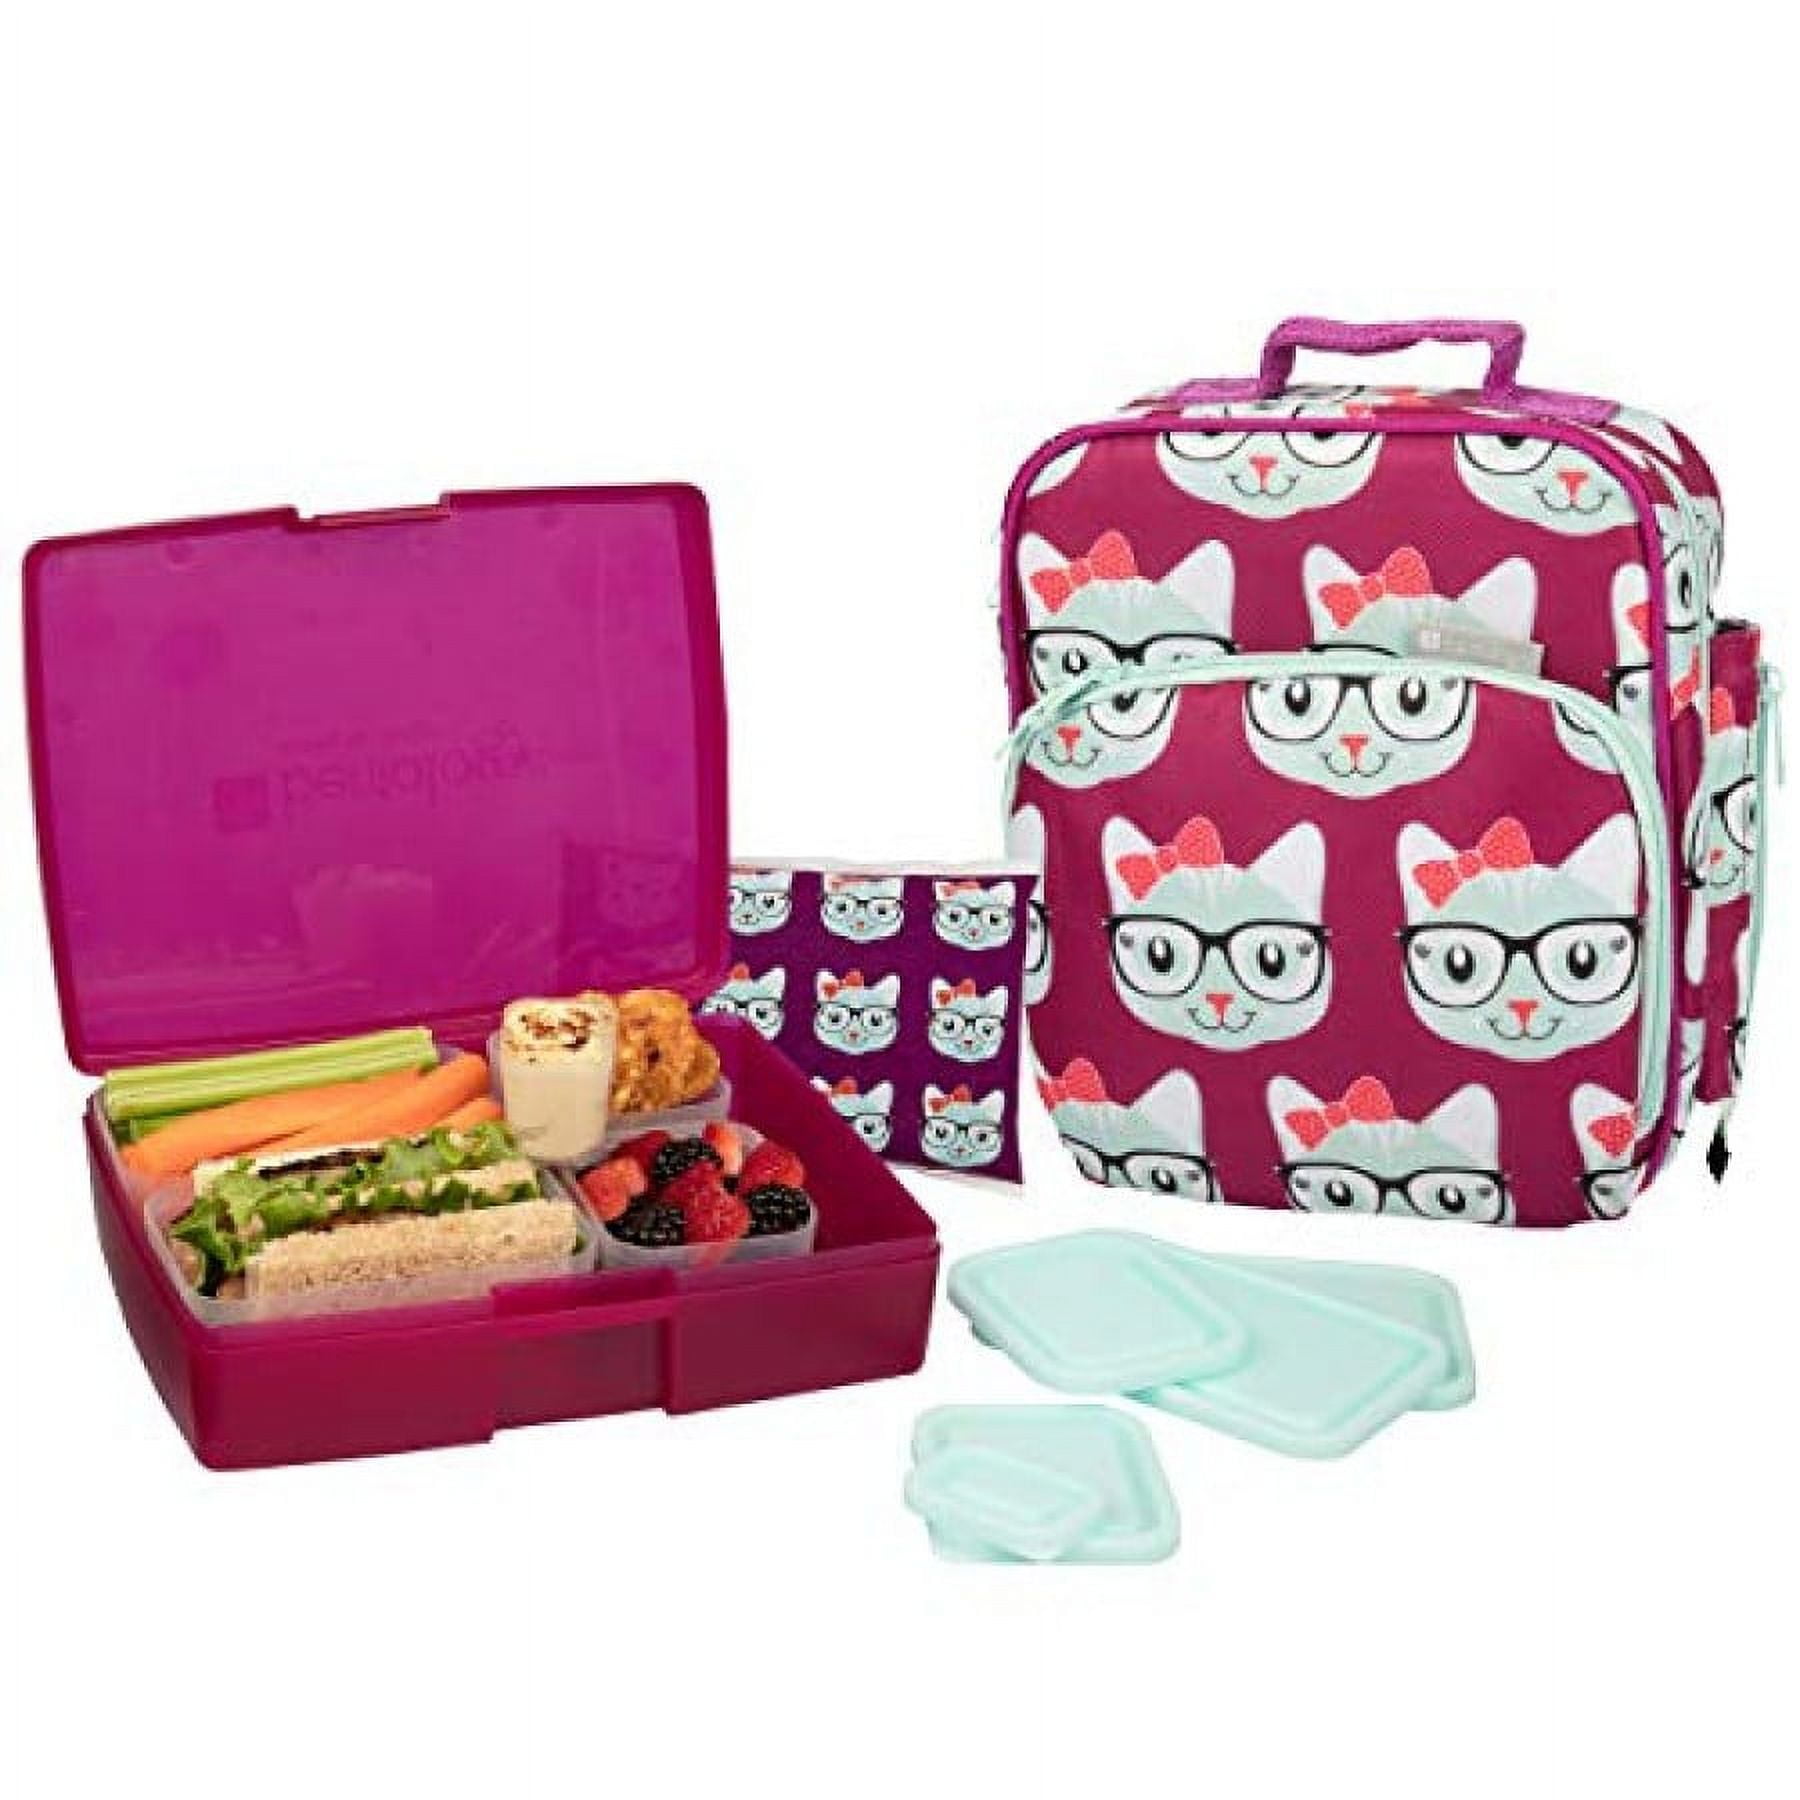 30Pcs Bento Box for Girls,Insulated Unique Lunch Bag Set 4 Compartments  Lunch Box with Accessories I…See more 30Pcs Bento Box for Girls,Insulated